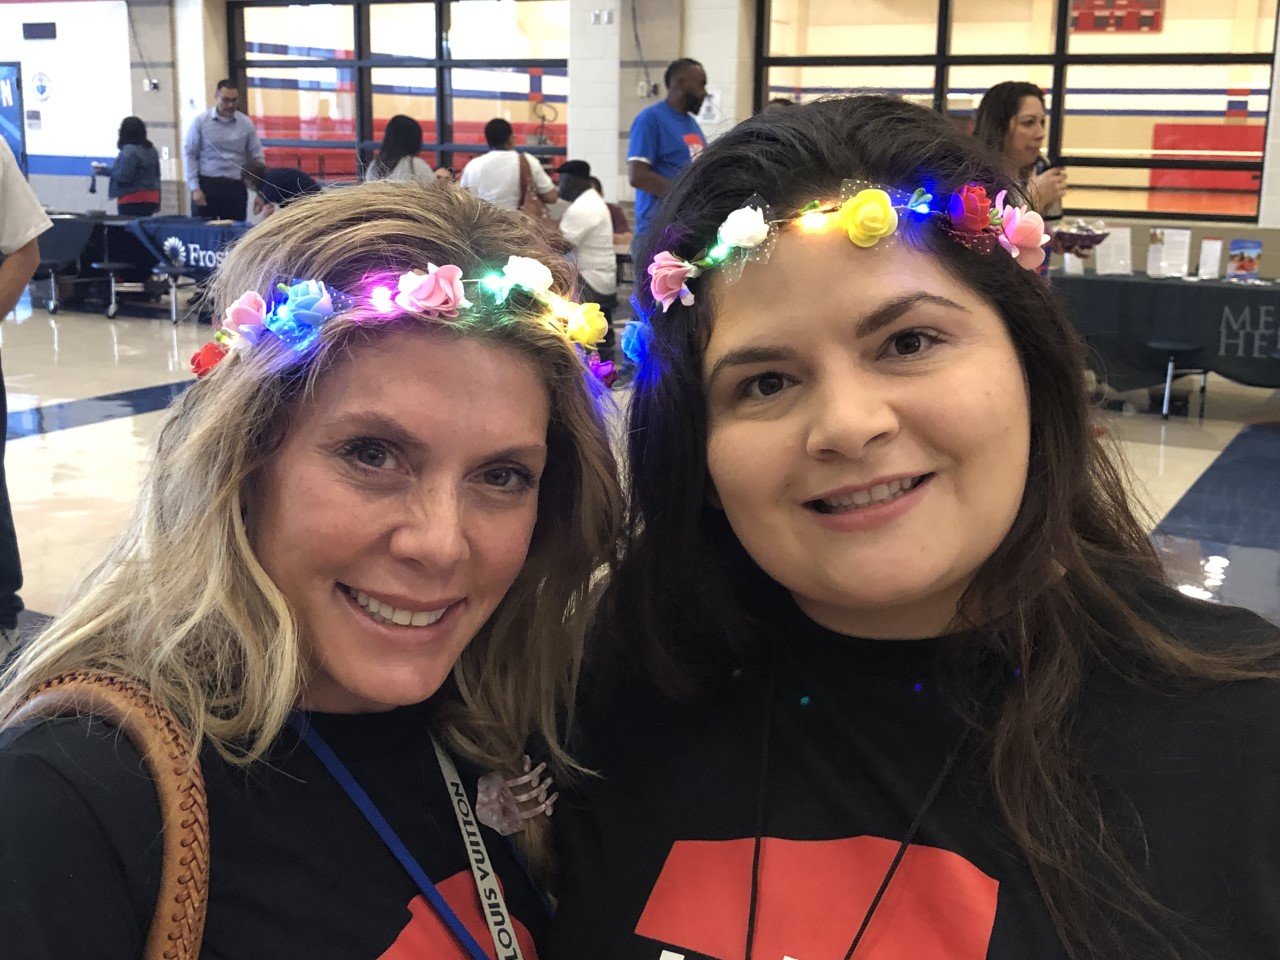 Tania Hausmann and Alicia Garcia of the Royal Early Childhood Center show off their flowers at the Royal ISD convocation. The flowers had small electric lights that helped brighten the event.